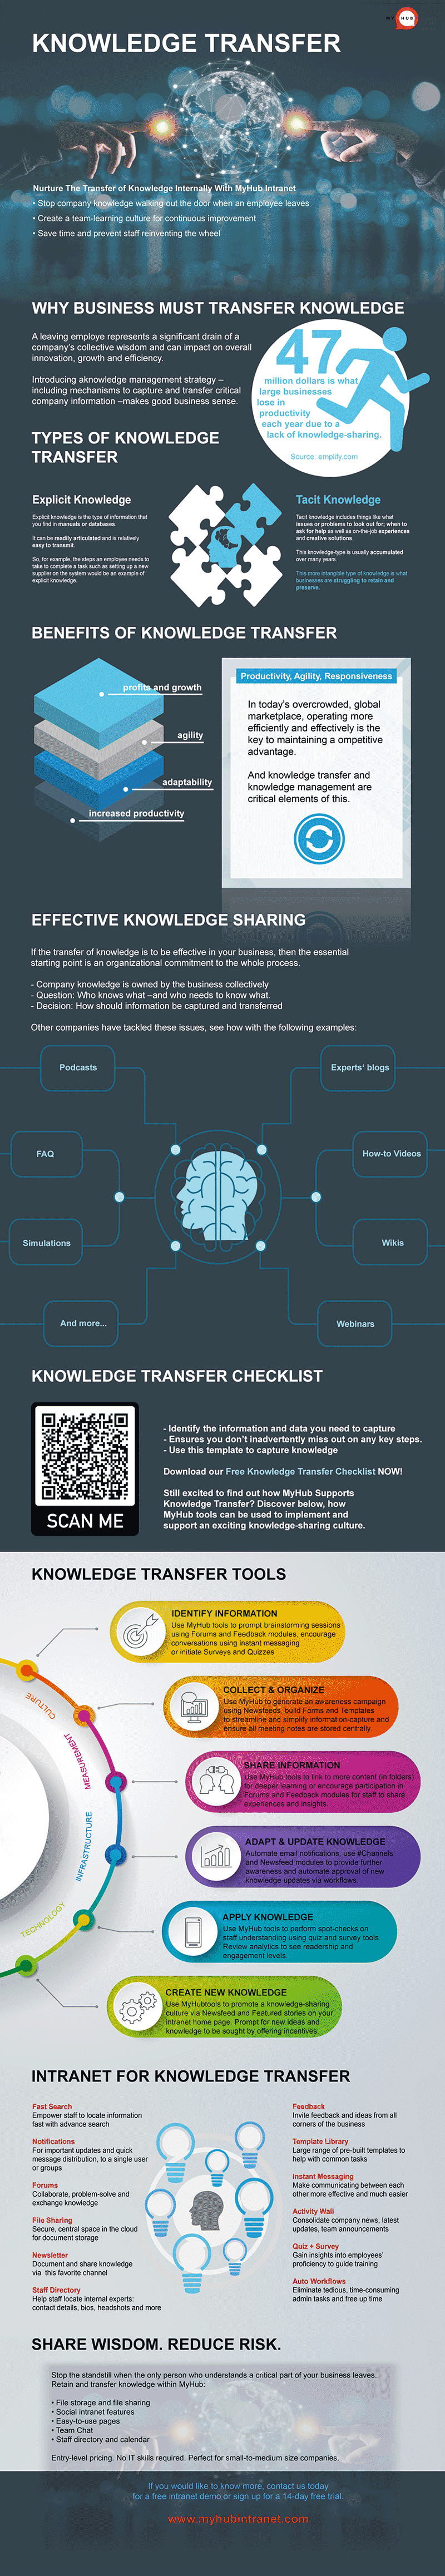 Knowledge-Transfer-Infographic-800